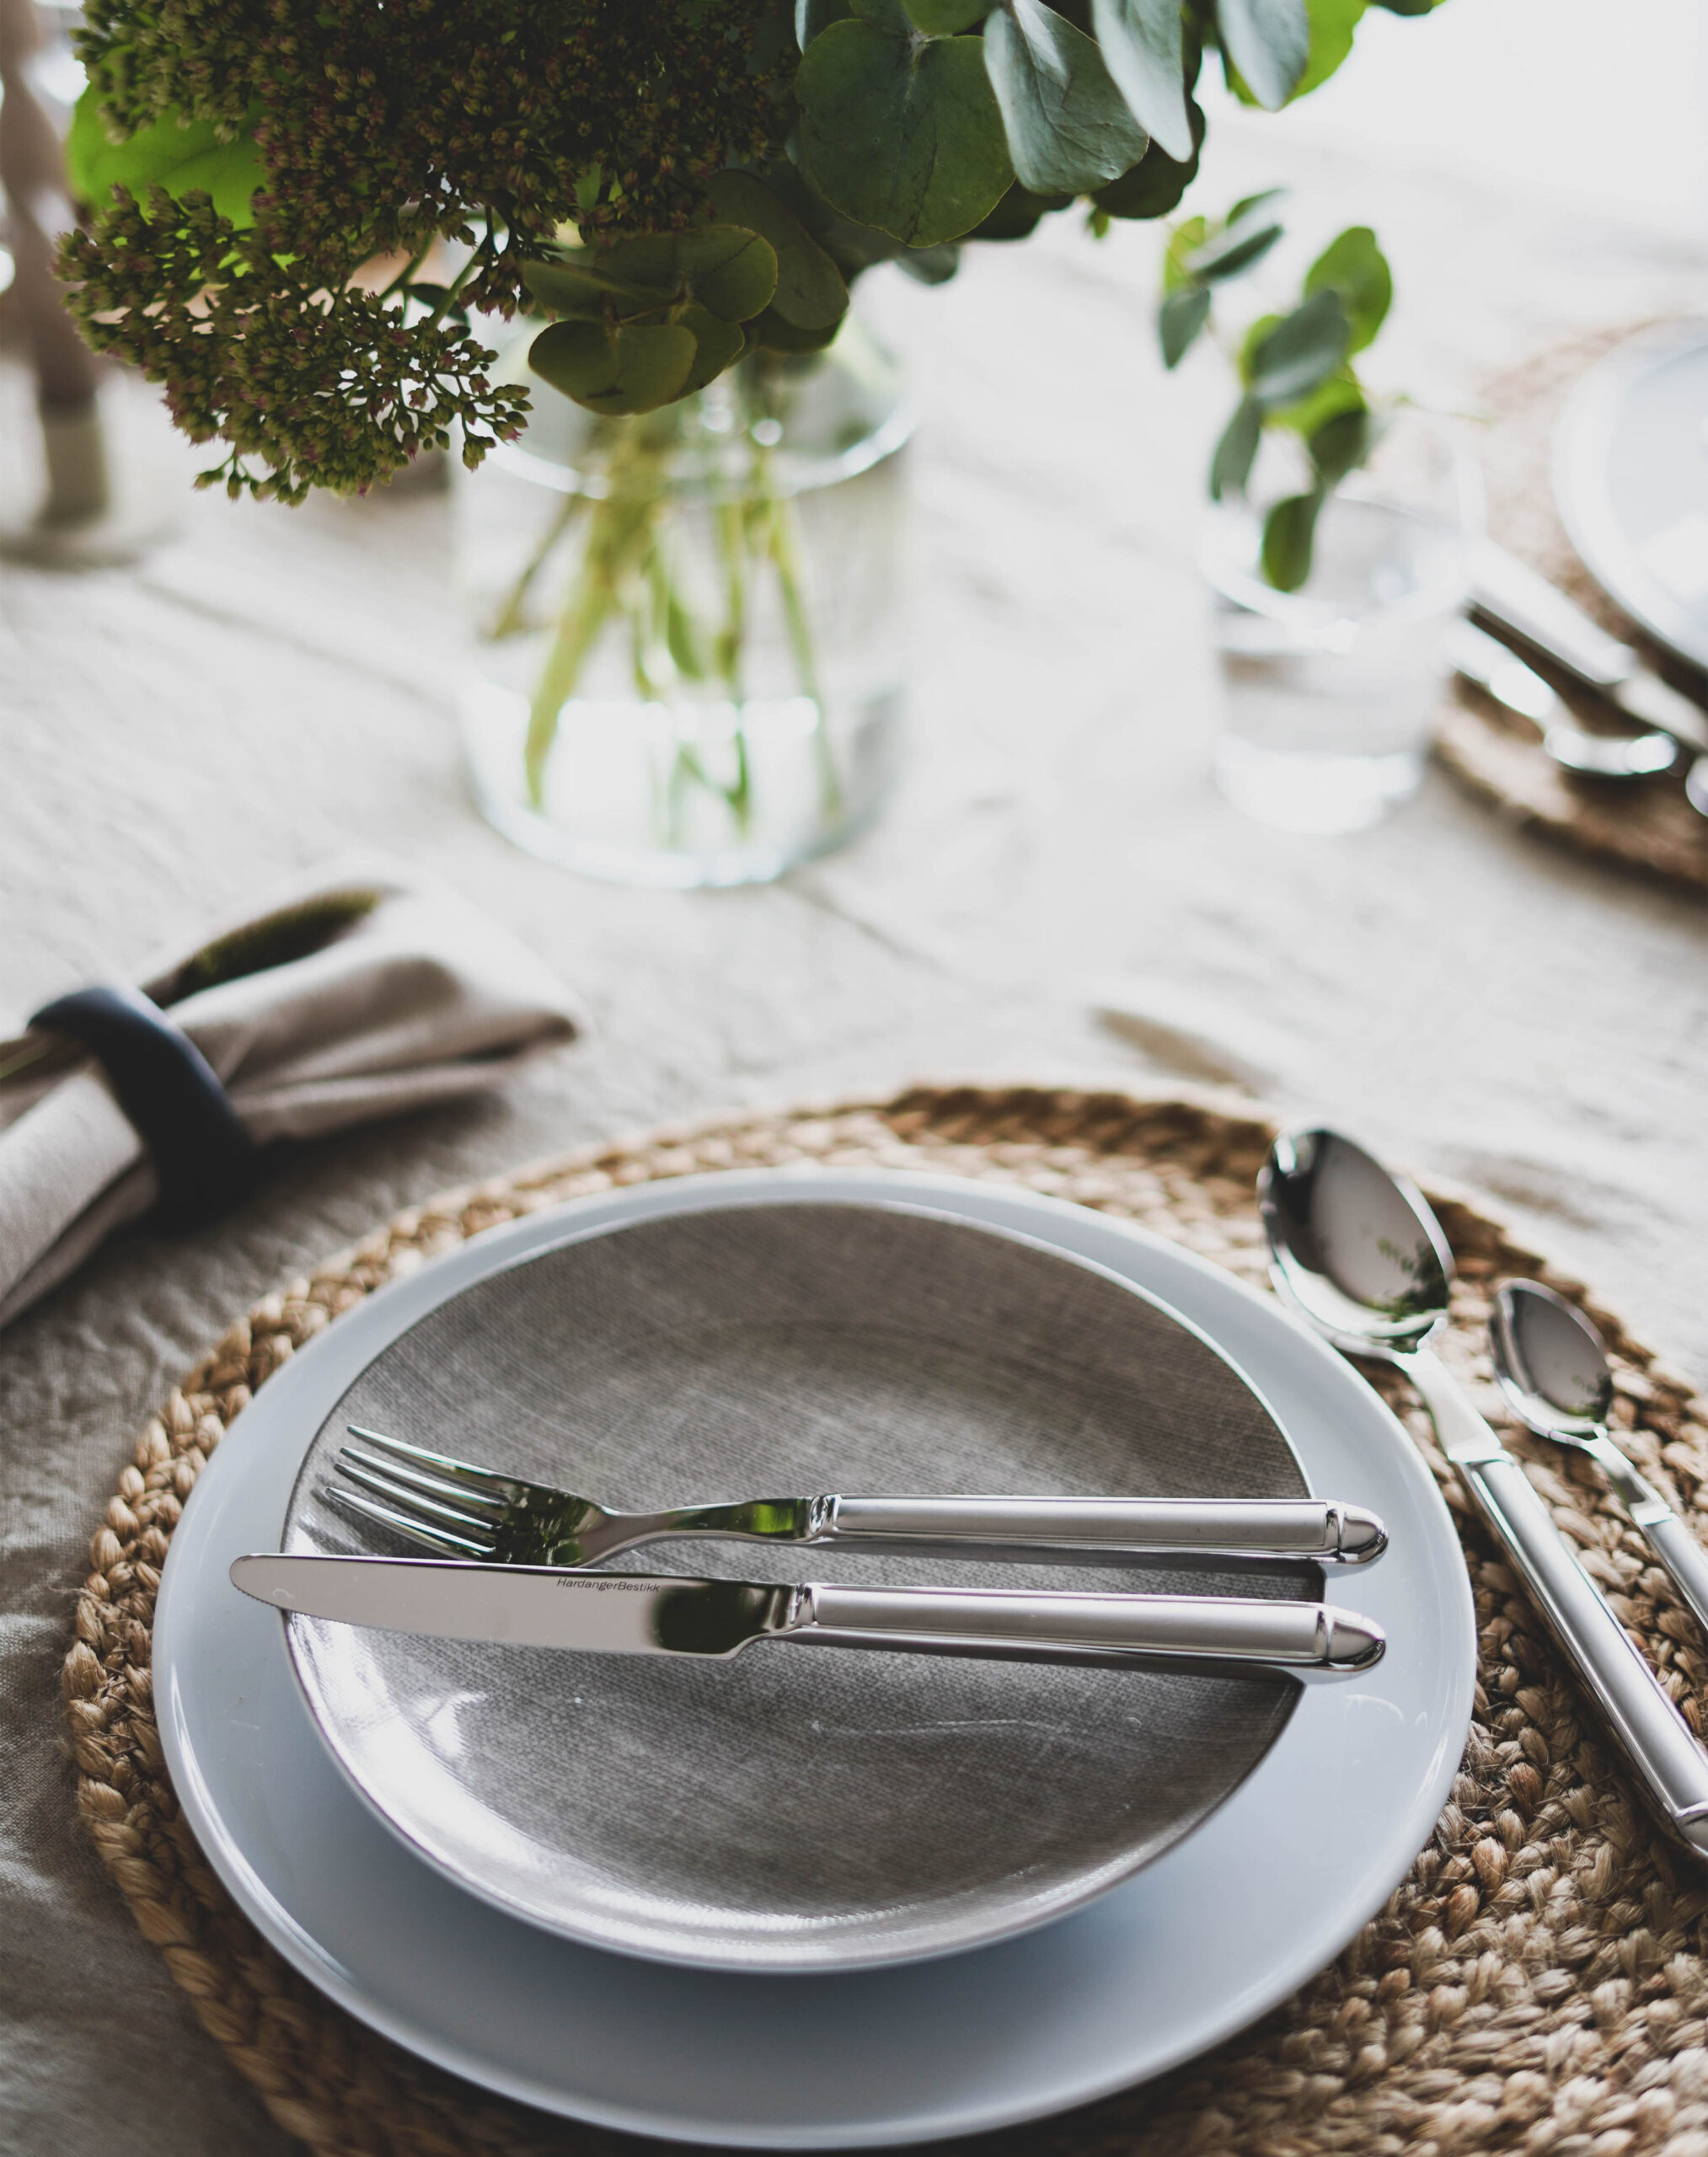 Nora cutlery parts table setting